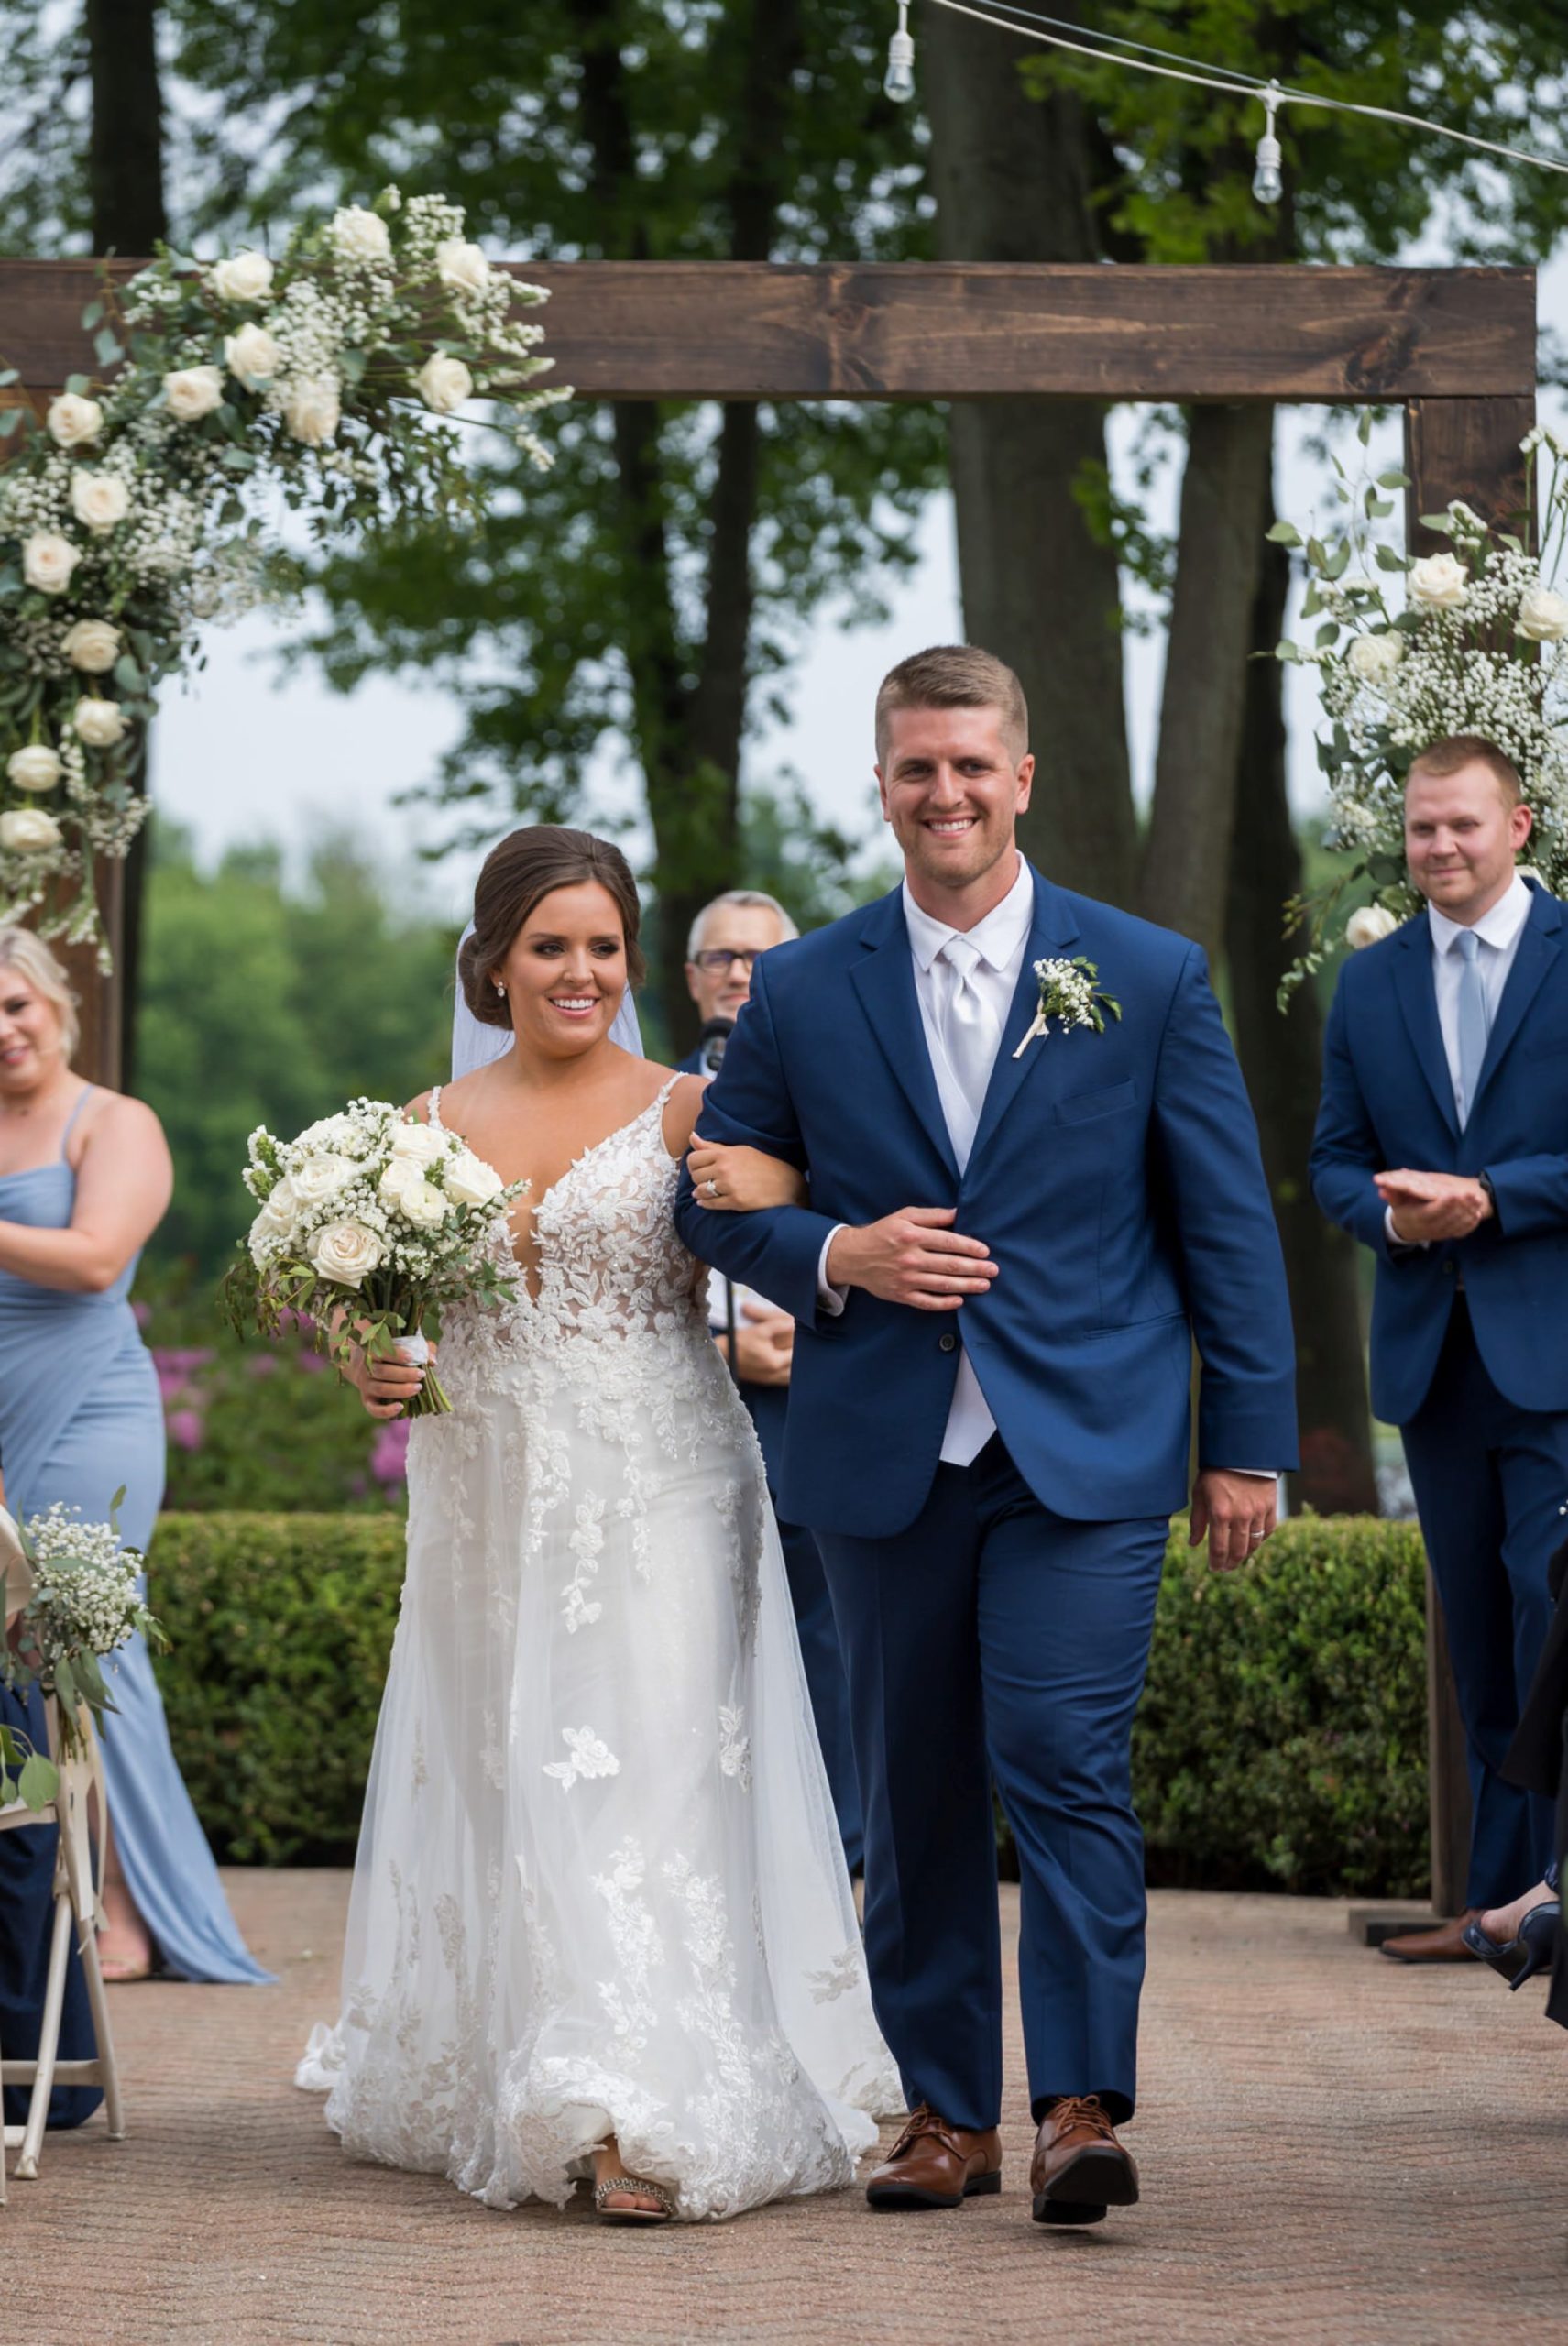 bride and groom walk down the aisle at their wedding at Cherry Creek Golf Course